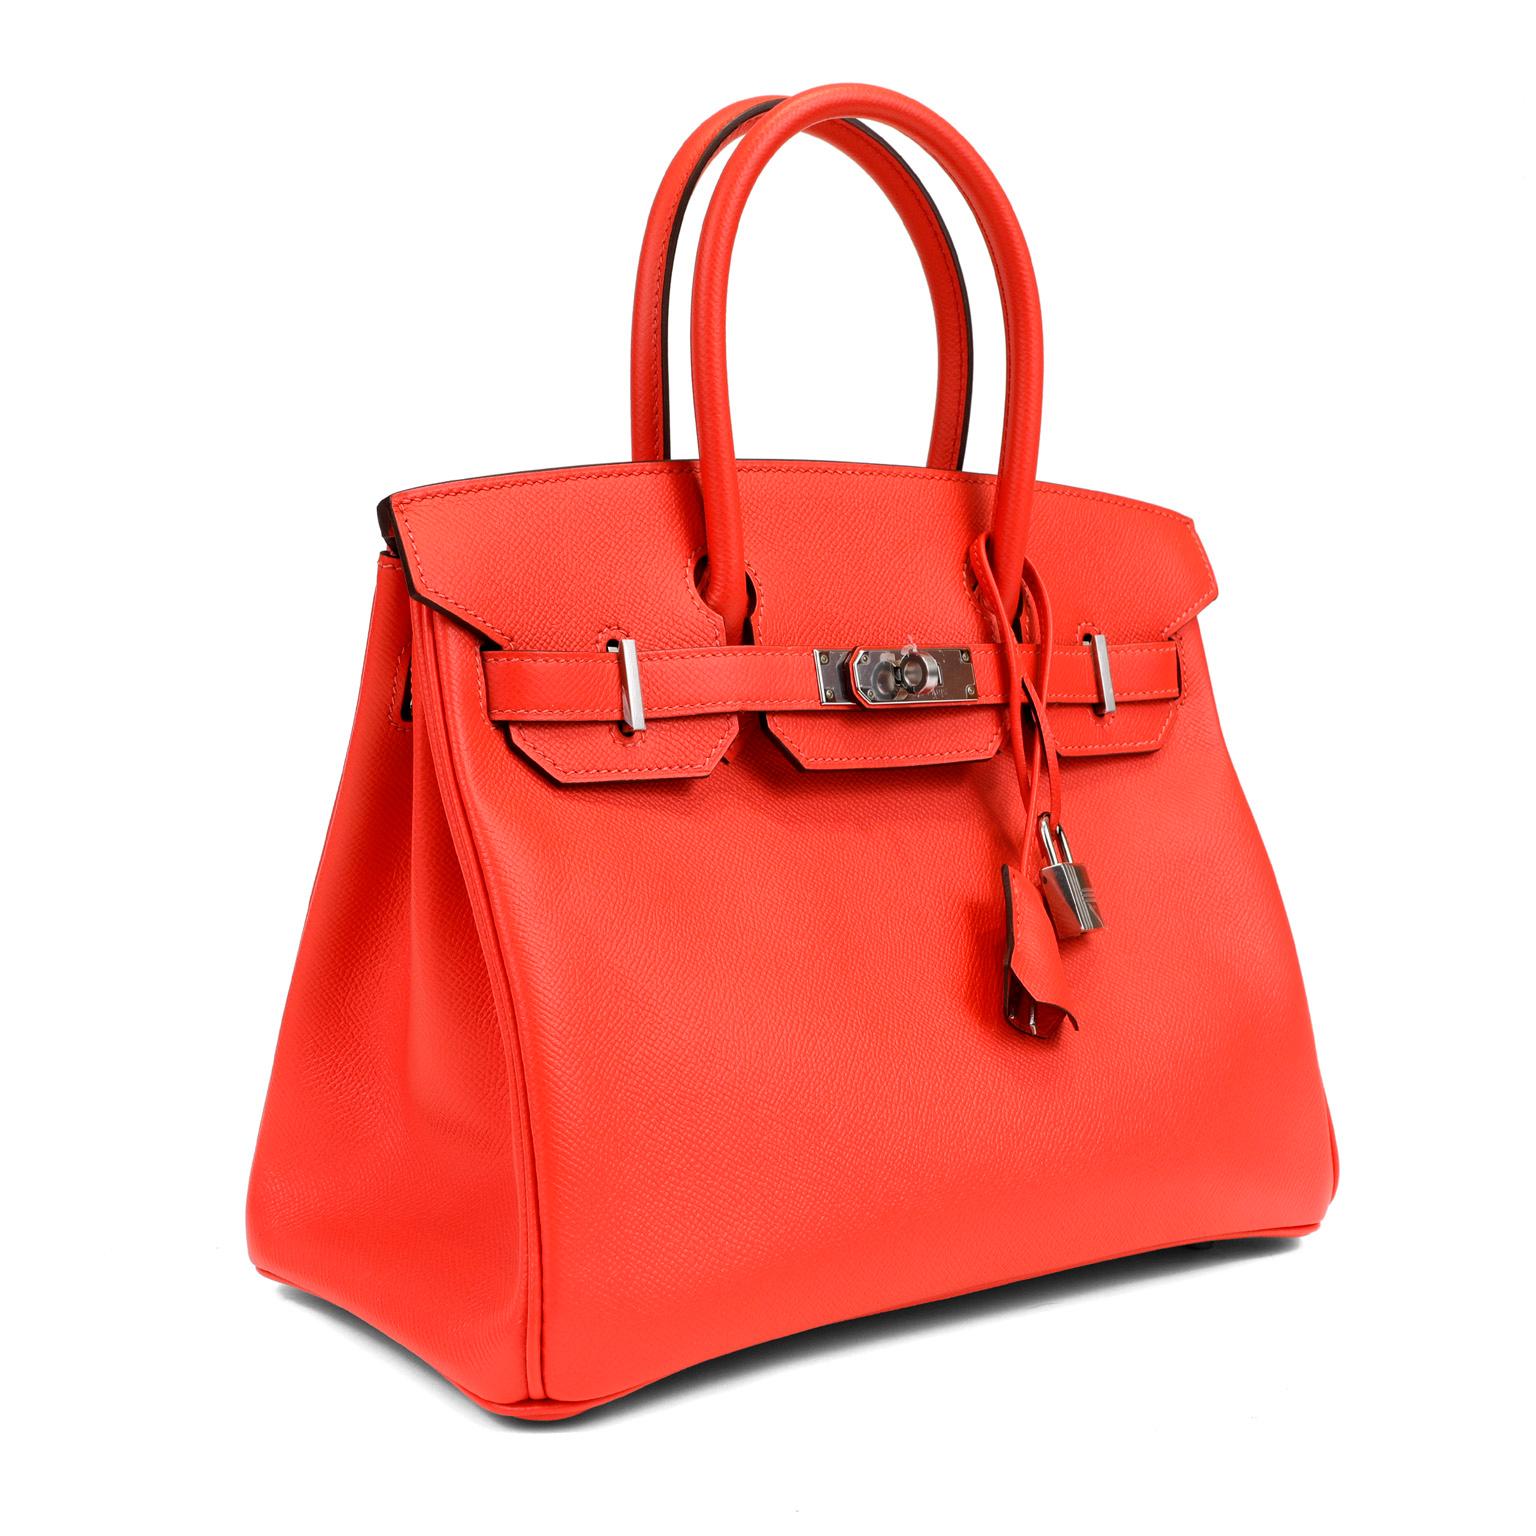 This authentic Hermès Rose Epsom 30 cm Birkin is in pristine unworn condition; the protective plastic is still intact on the hardware.    Considered the ultimate luxury item, the Hermès Birkin is stitched by hand. Waitlists are commonplace.   Rose